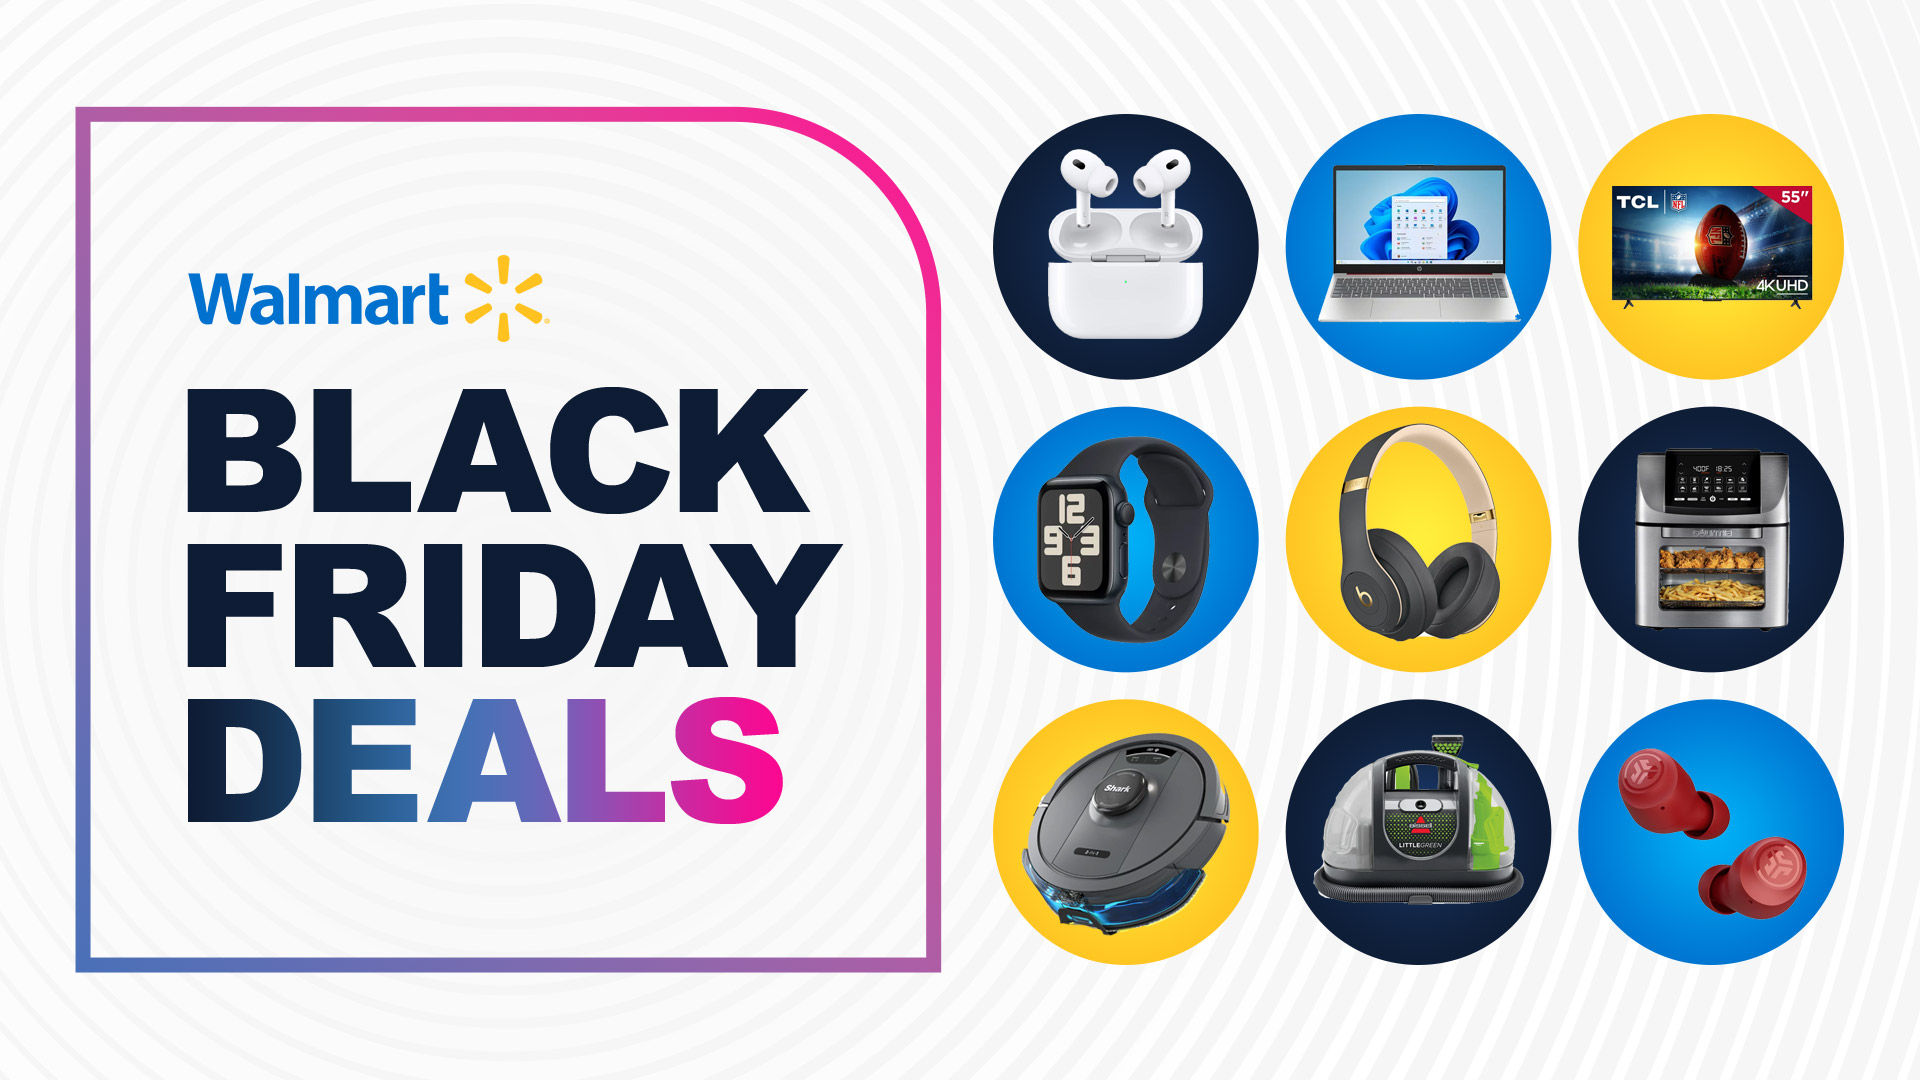 Walmart Black Friday sale LIVE 98 TV, 169 AirPods and 10 earbuds